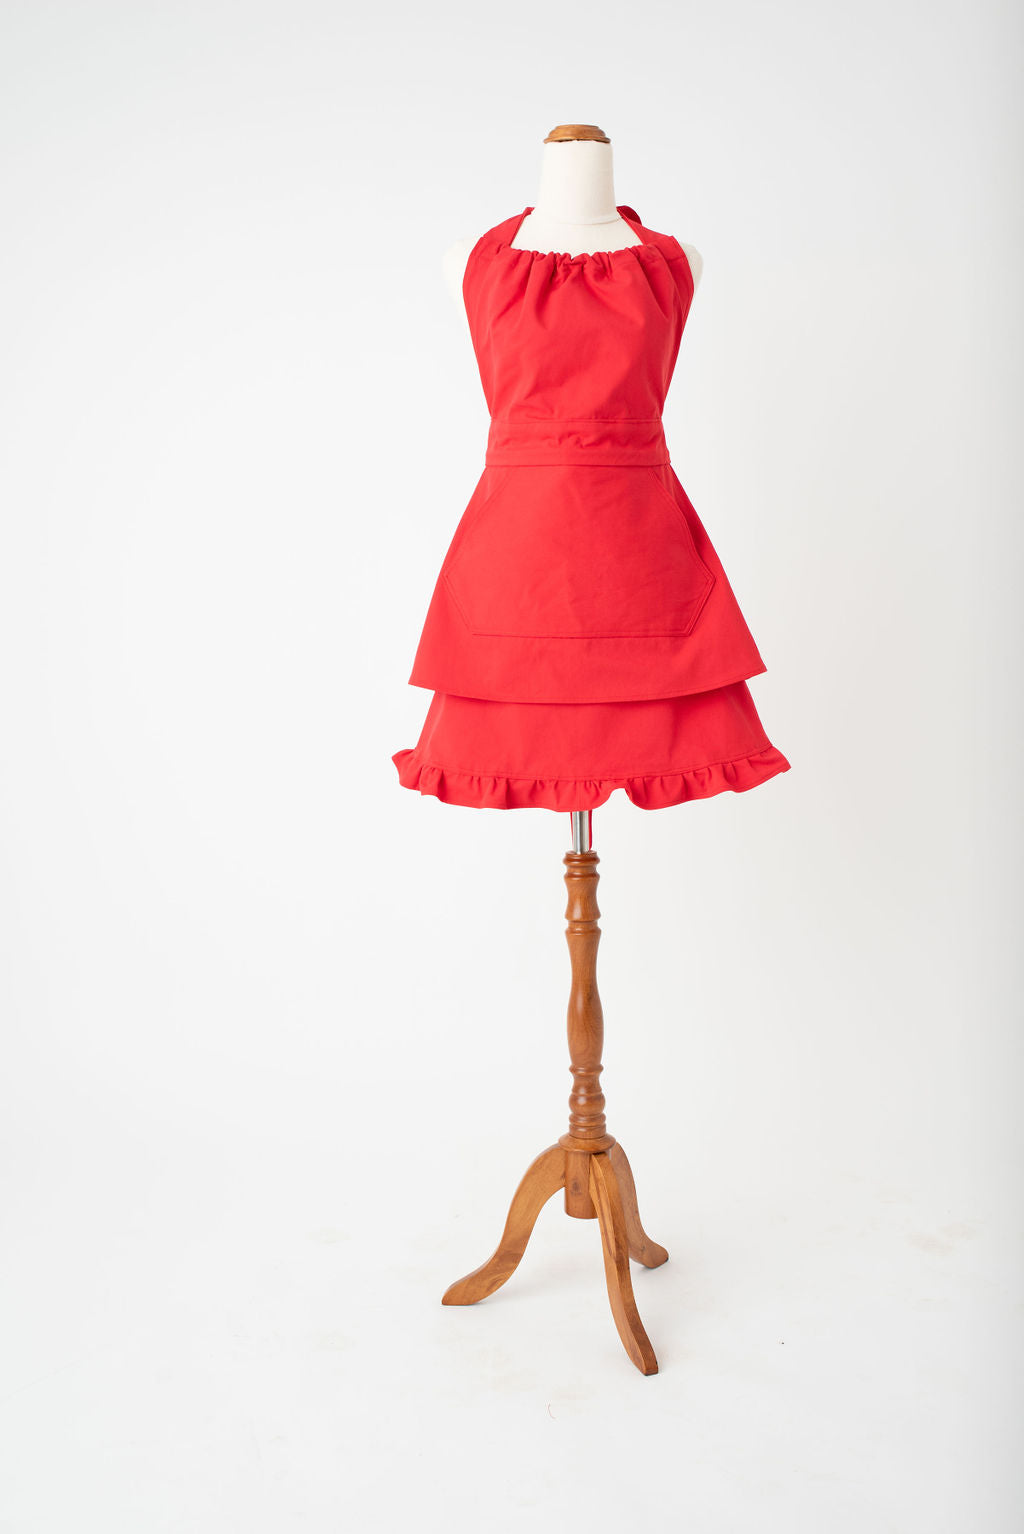 High waist red apron for women by Pretty Made - Front 